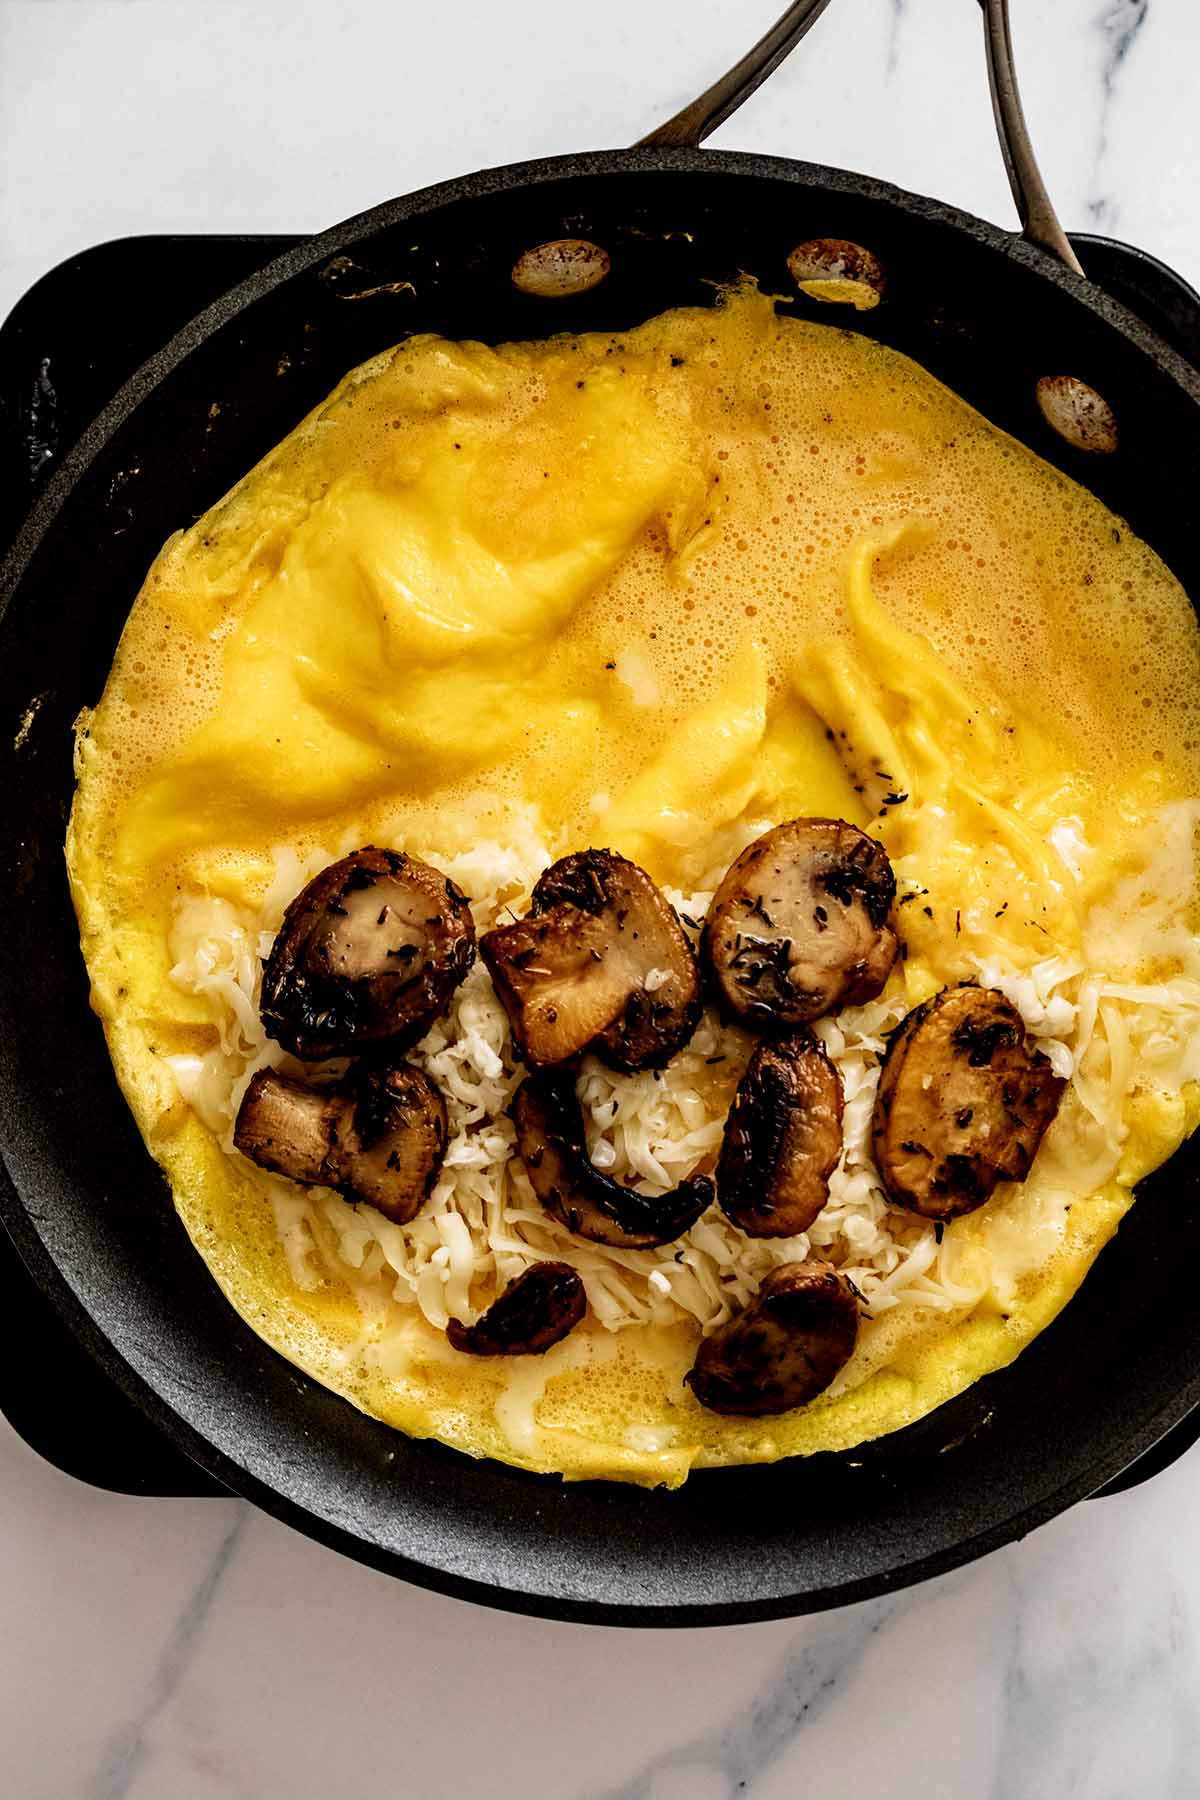 Semi-cooked omelette in a skillet with cooked mushrooms added to one half of omelette